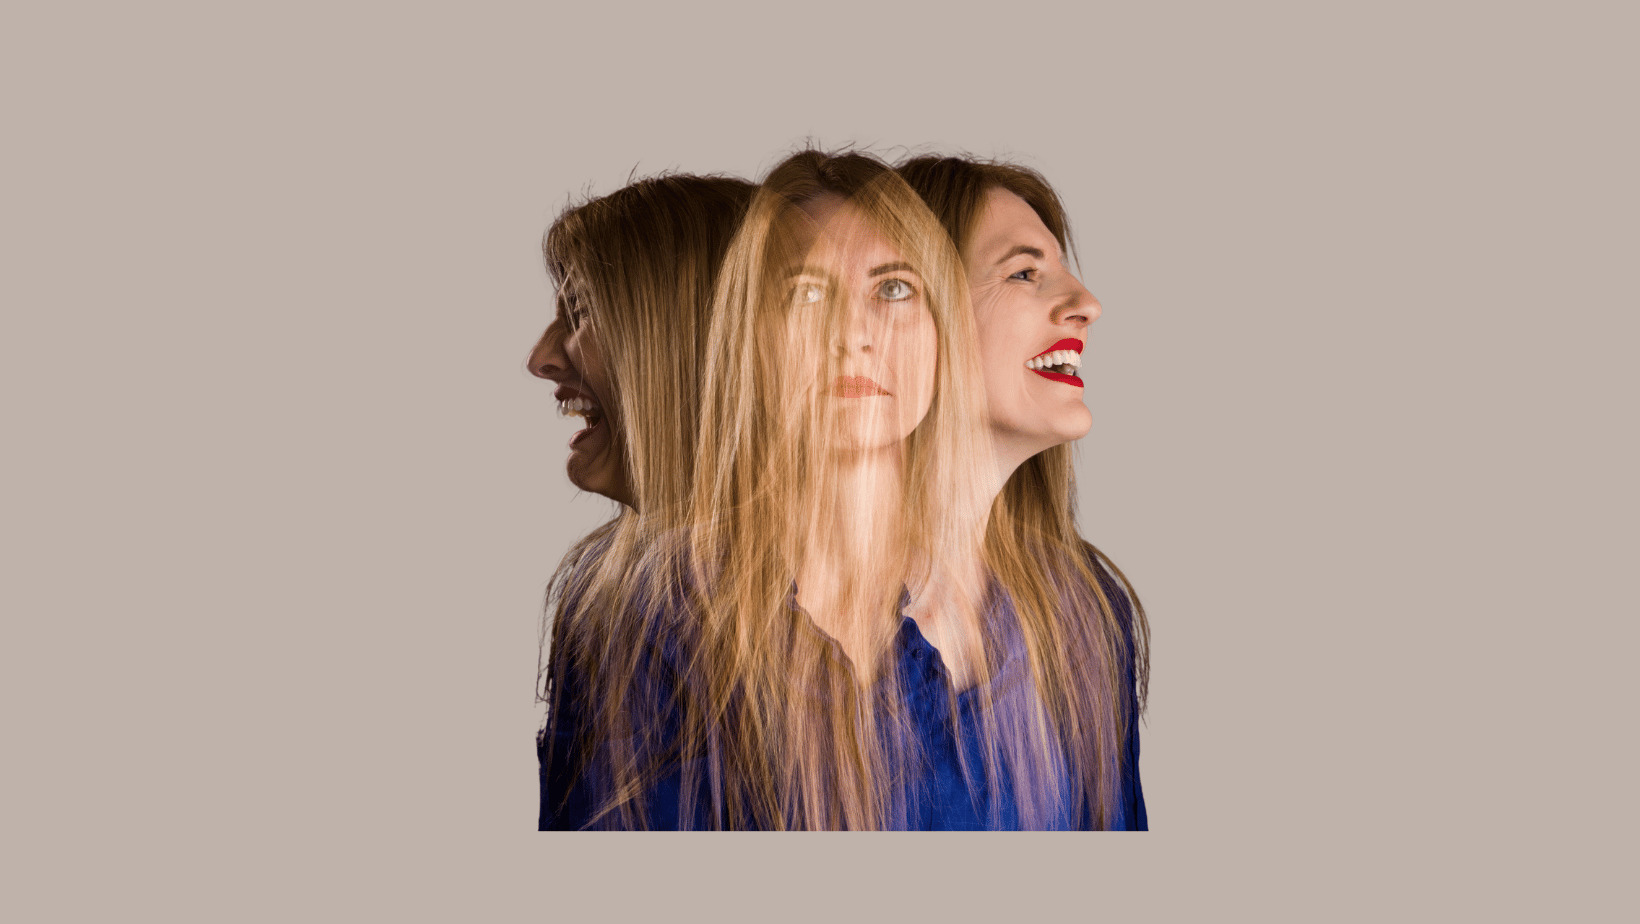 3 versions of blonde woman superimposed in blue shirt crying, neutral, laughing